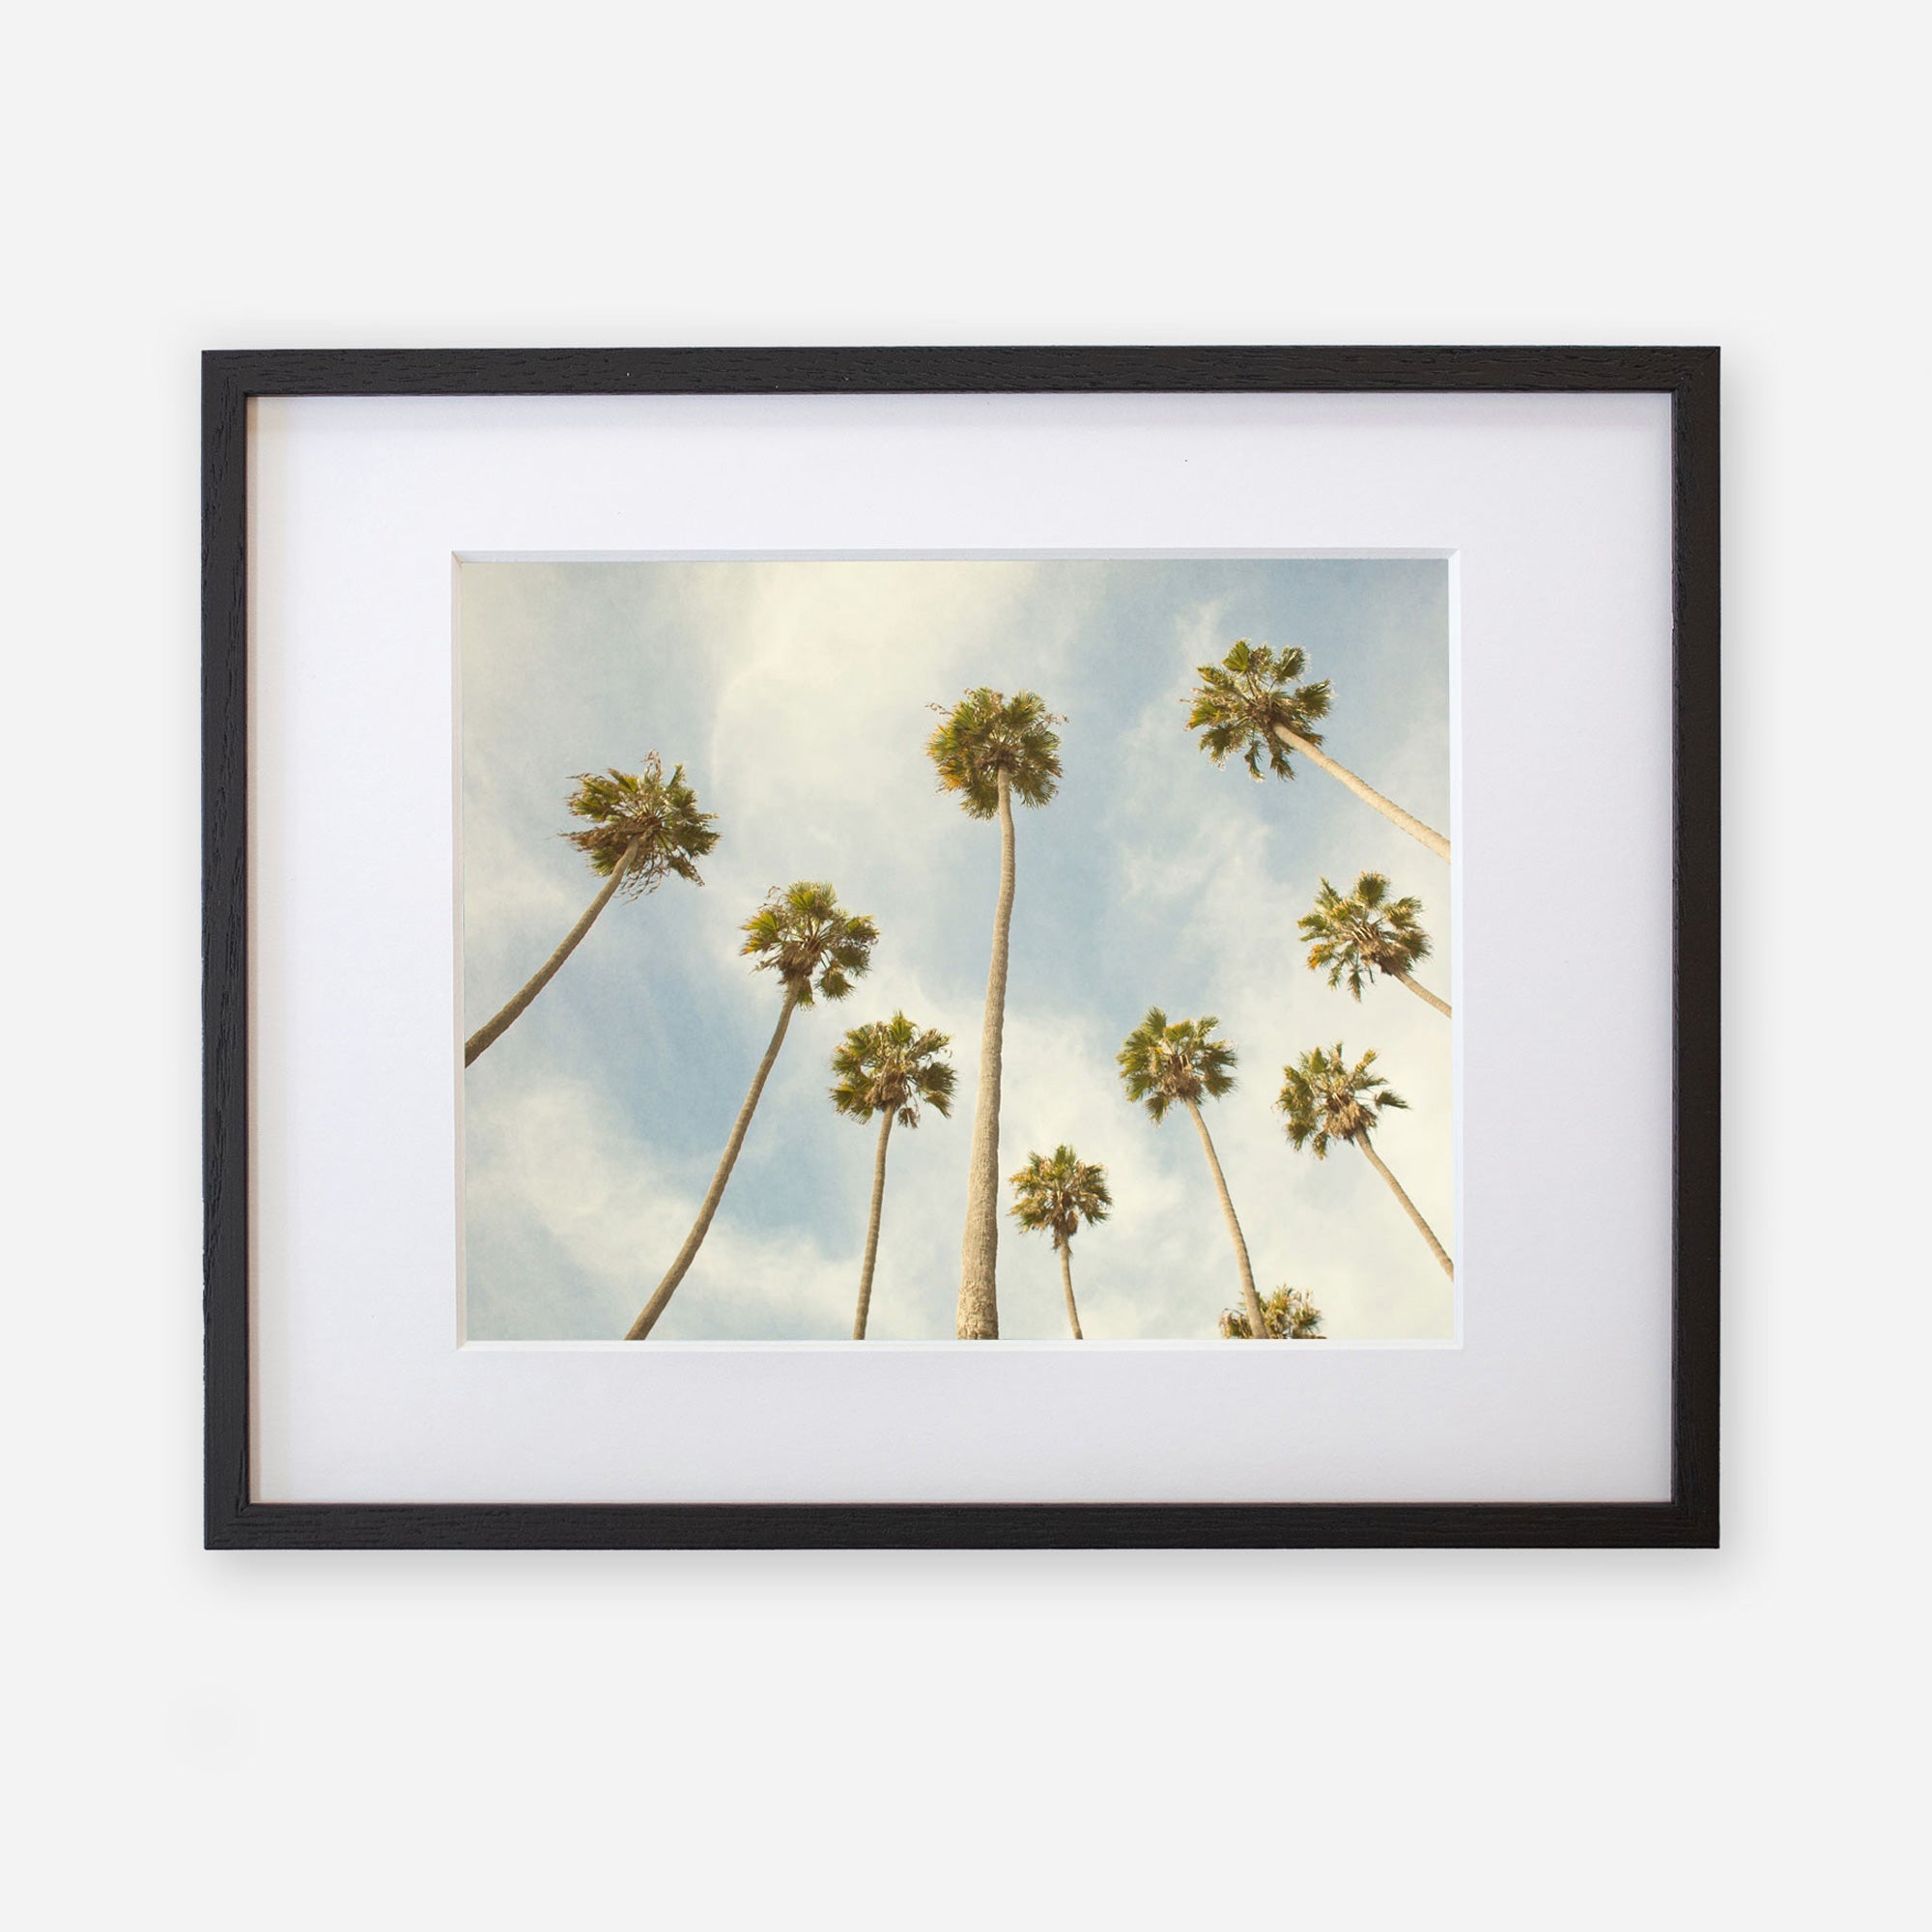 Framed artwork featuring a view of tall California palm trees from below against a cloudy blue sky background, printed on archival photographic paper with a non-glossy lustre finish is the Offley Green Palm Tree Print, California Beach Scene &#39;Reach for the Palms&#39;.